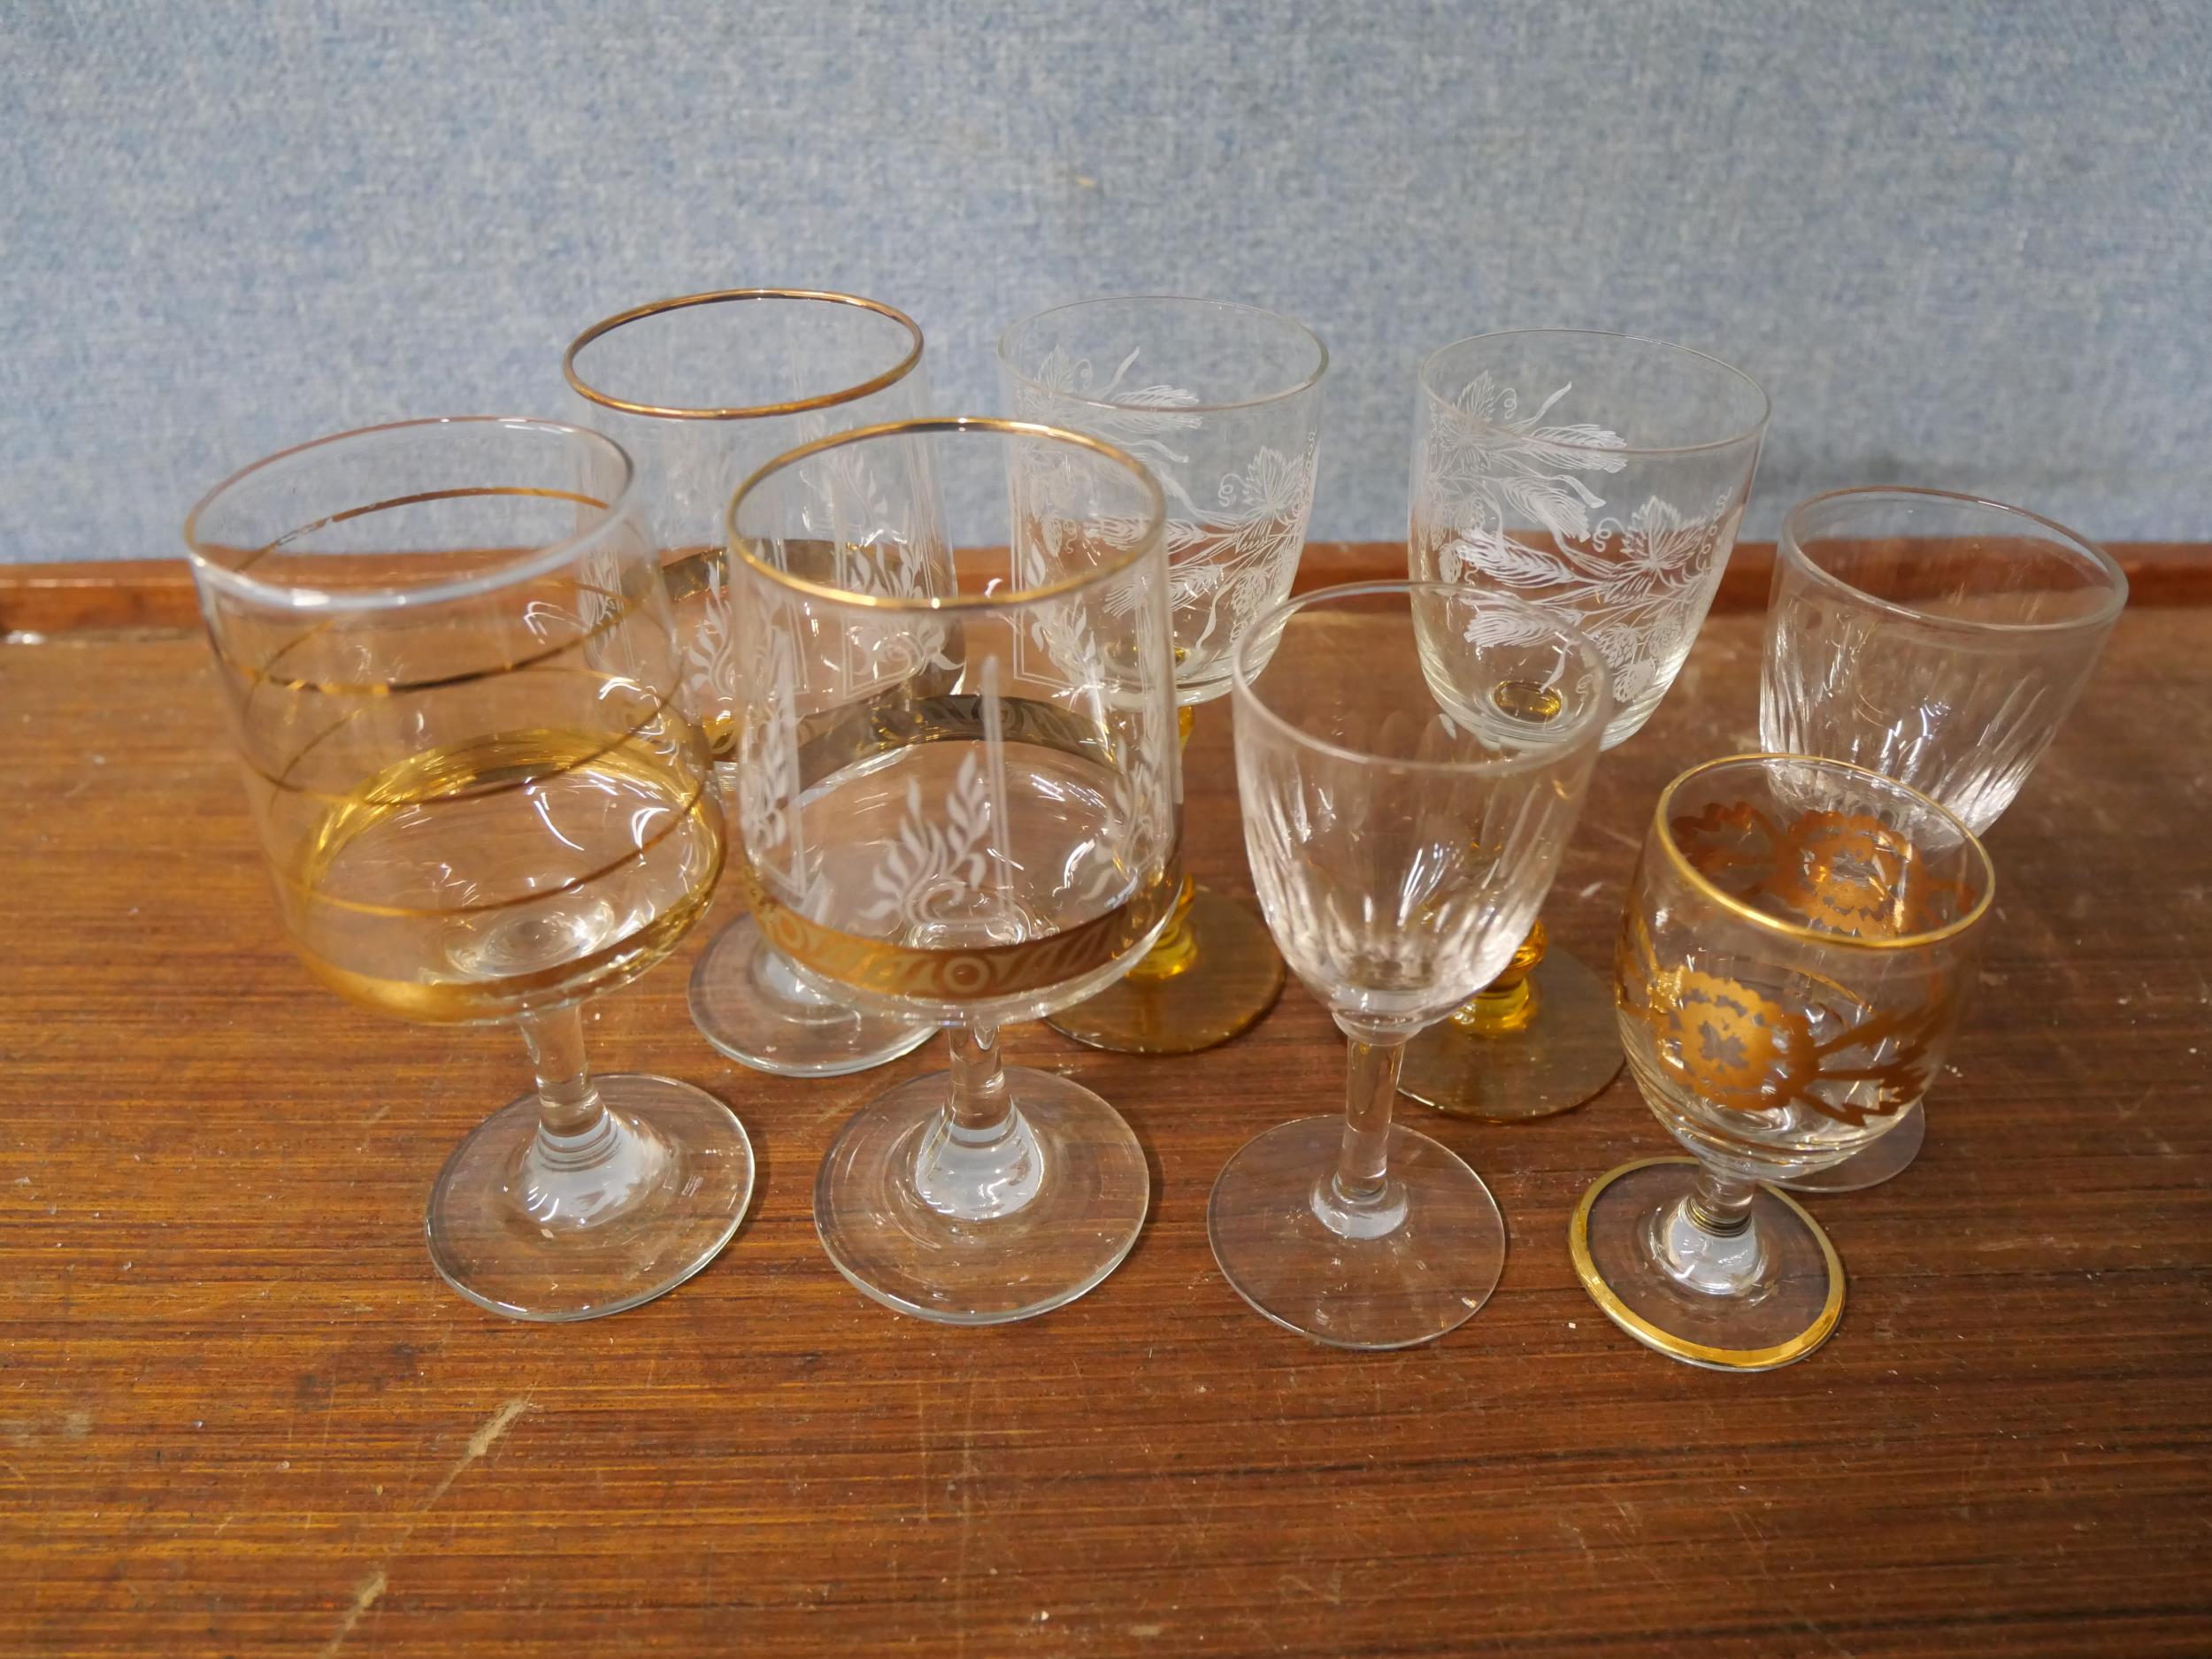 A collection of assorted china and etched drinking glasses